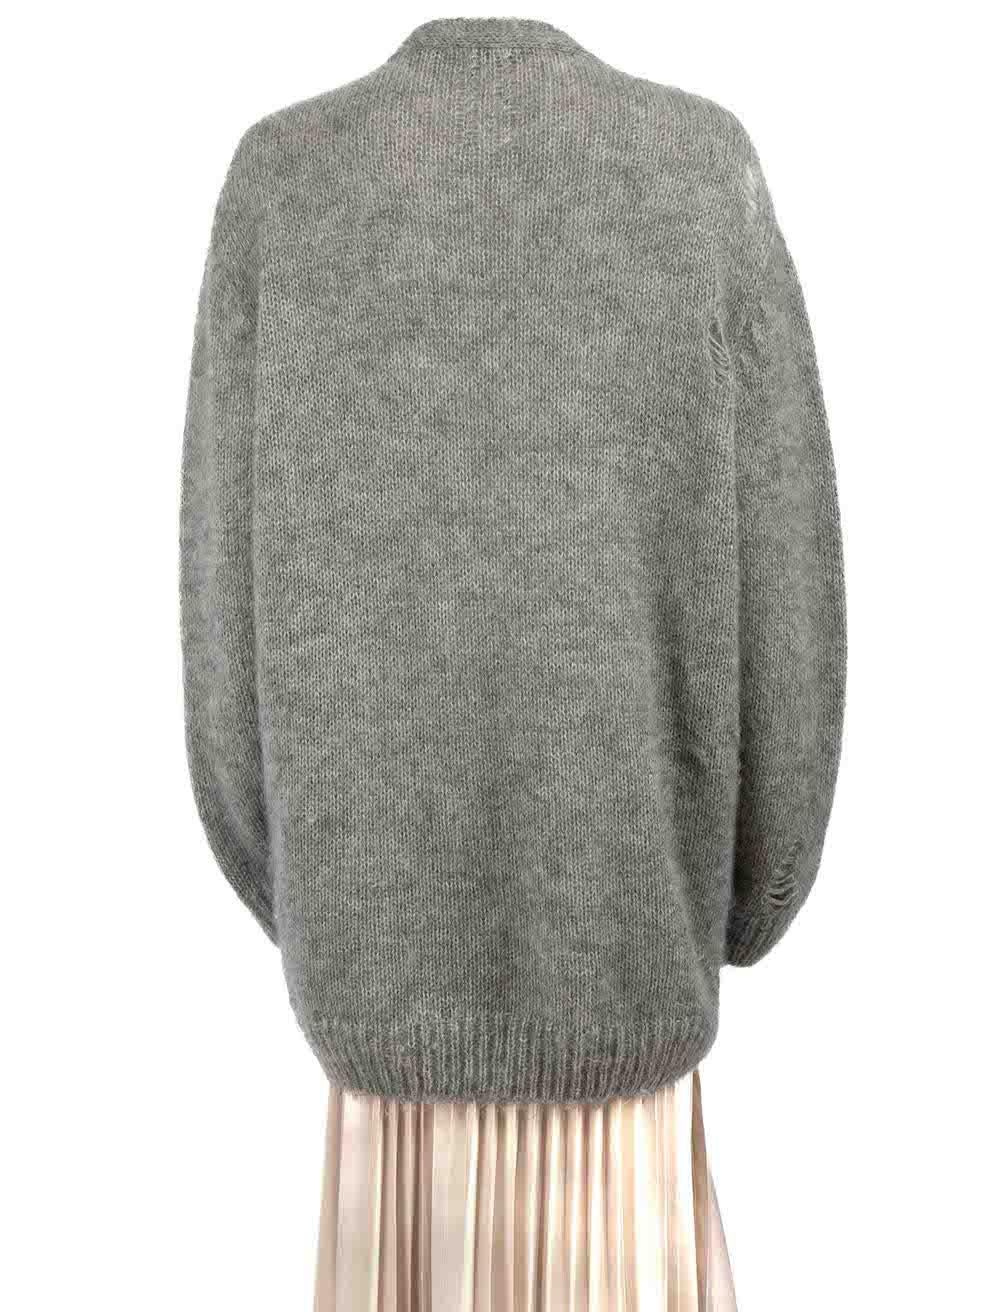 Saint Laurent Grey Mohair Distressed Cardigan Size XL In Good Condition For Sale In London, GB